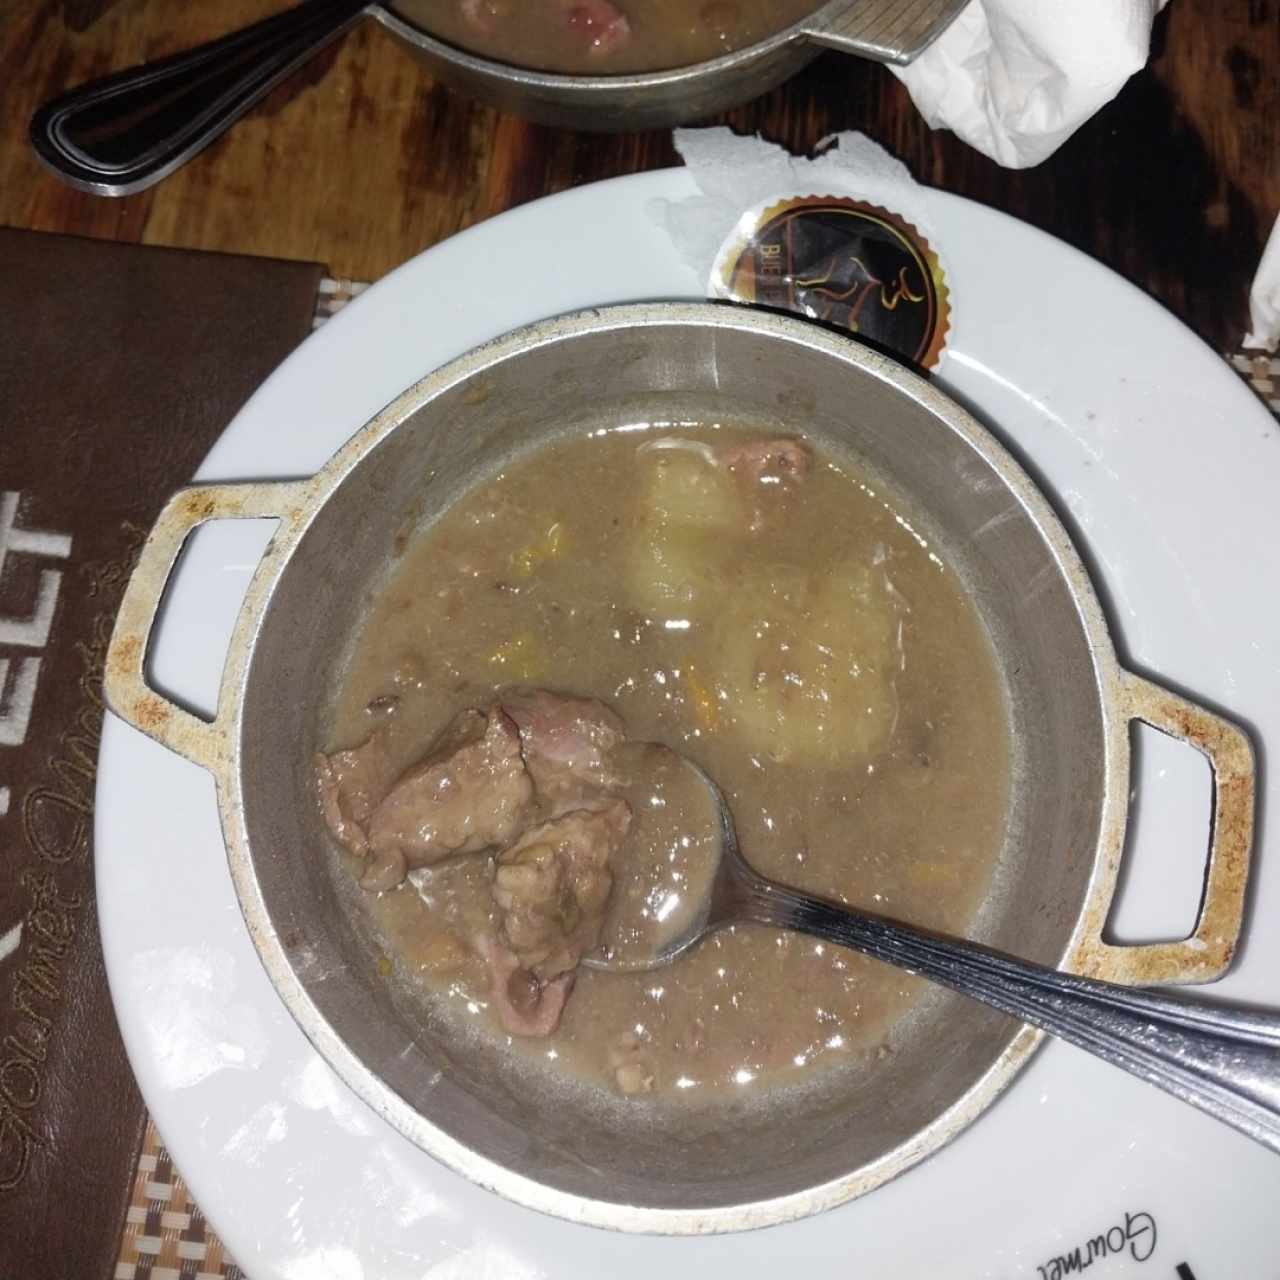 Contry Soup